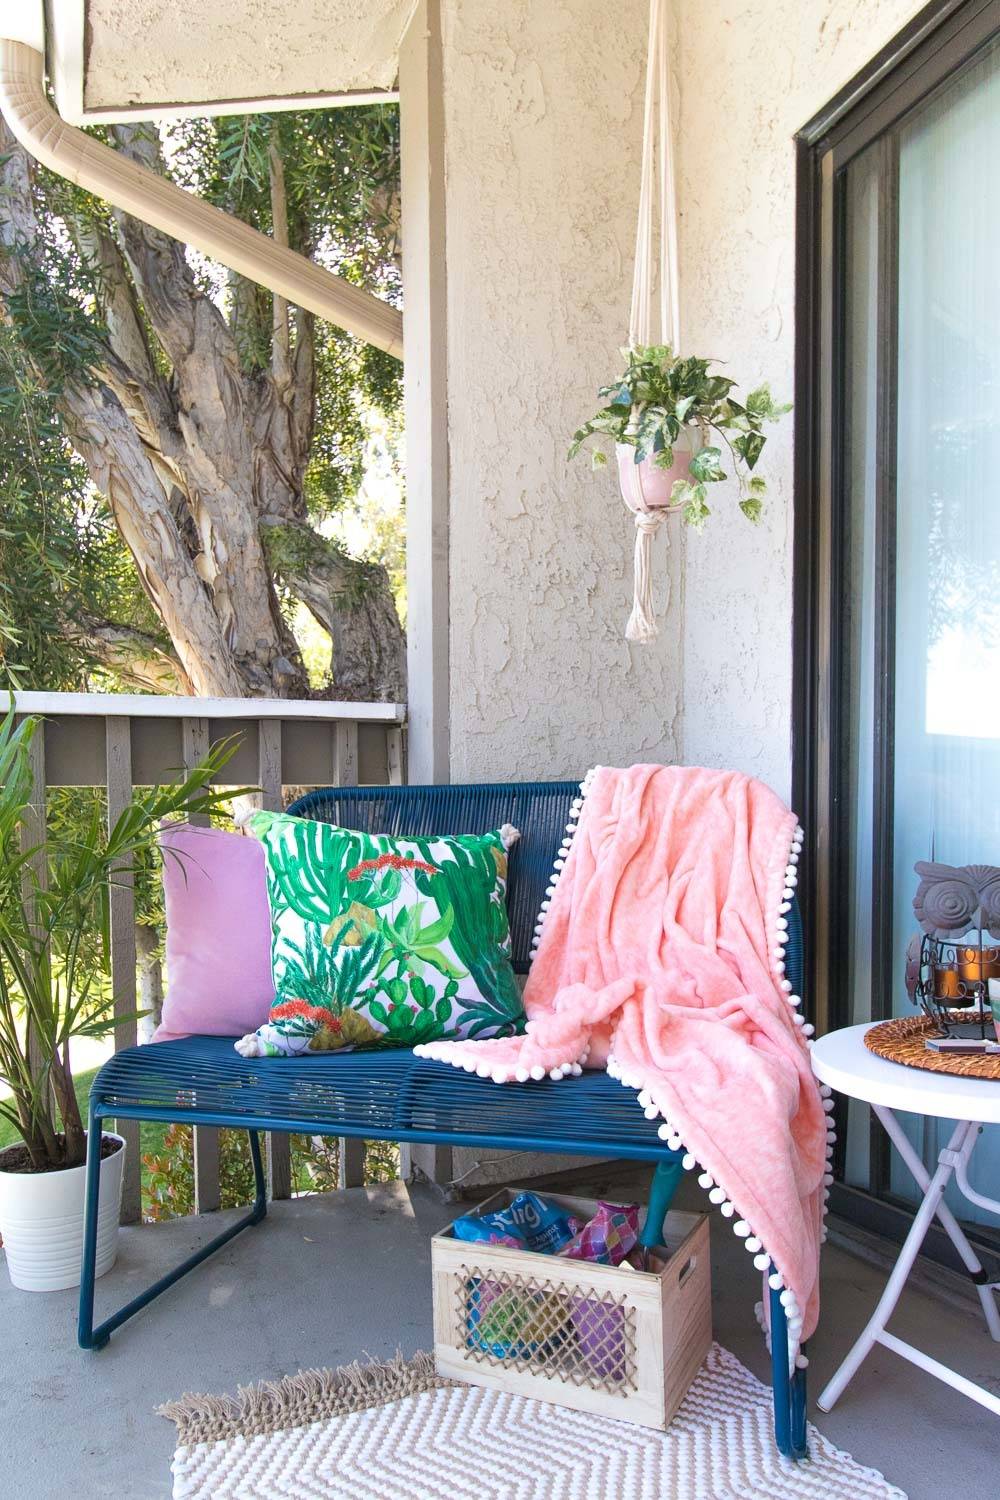 A tiny porch with seating.